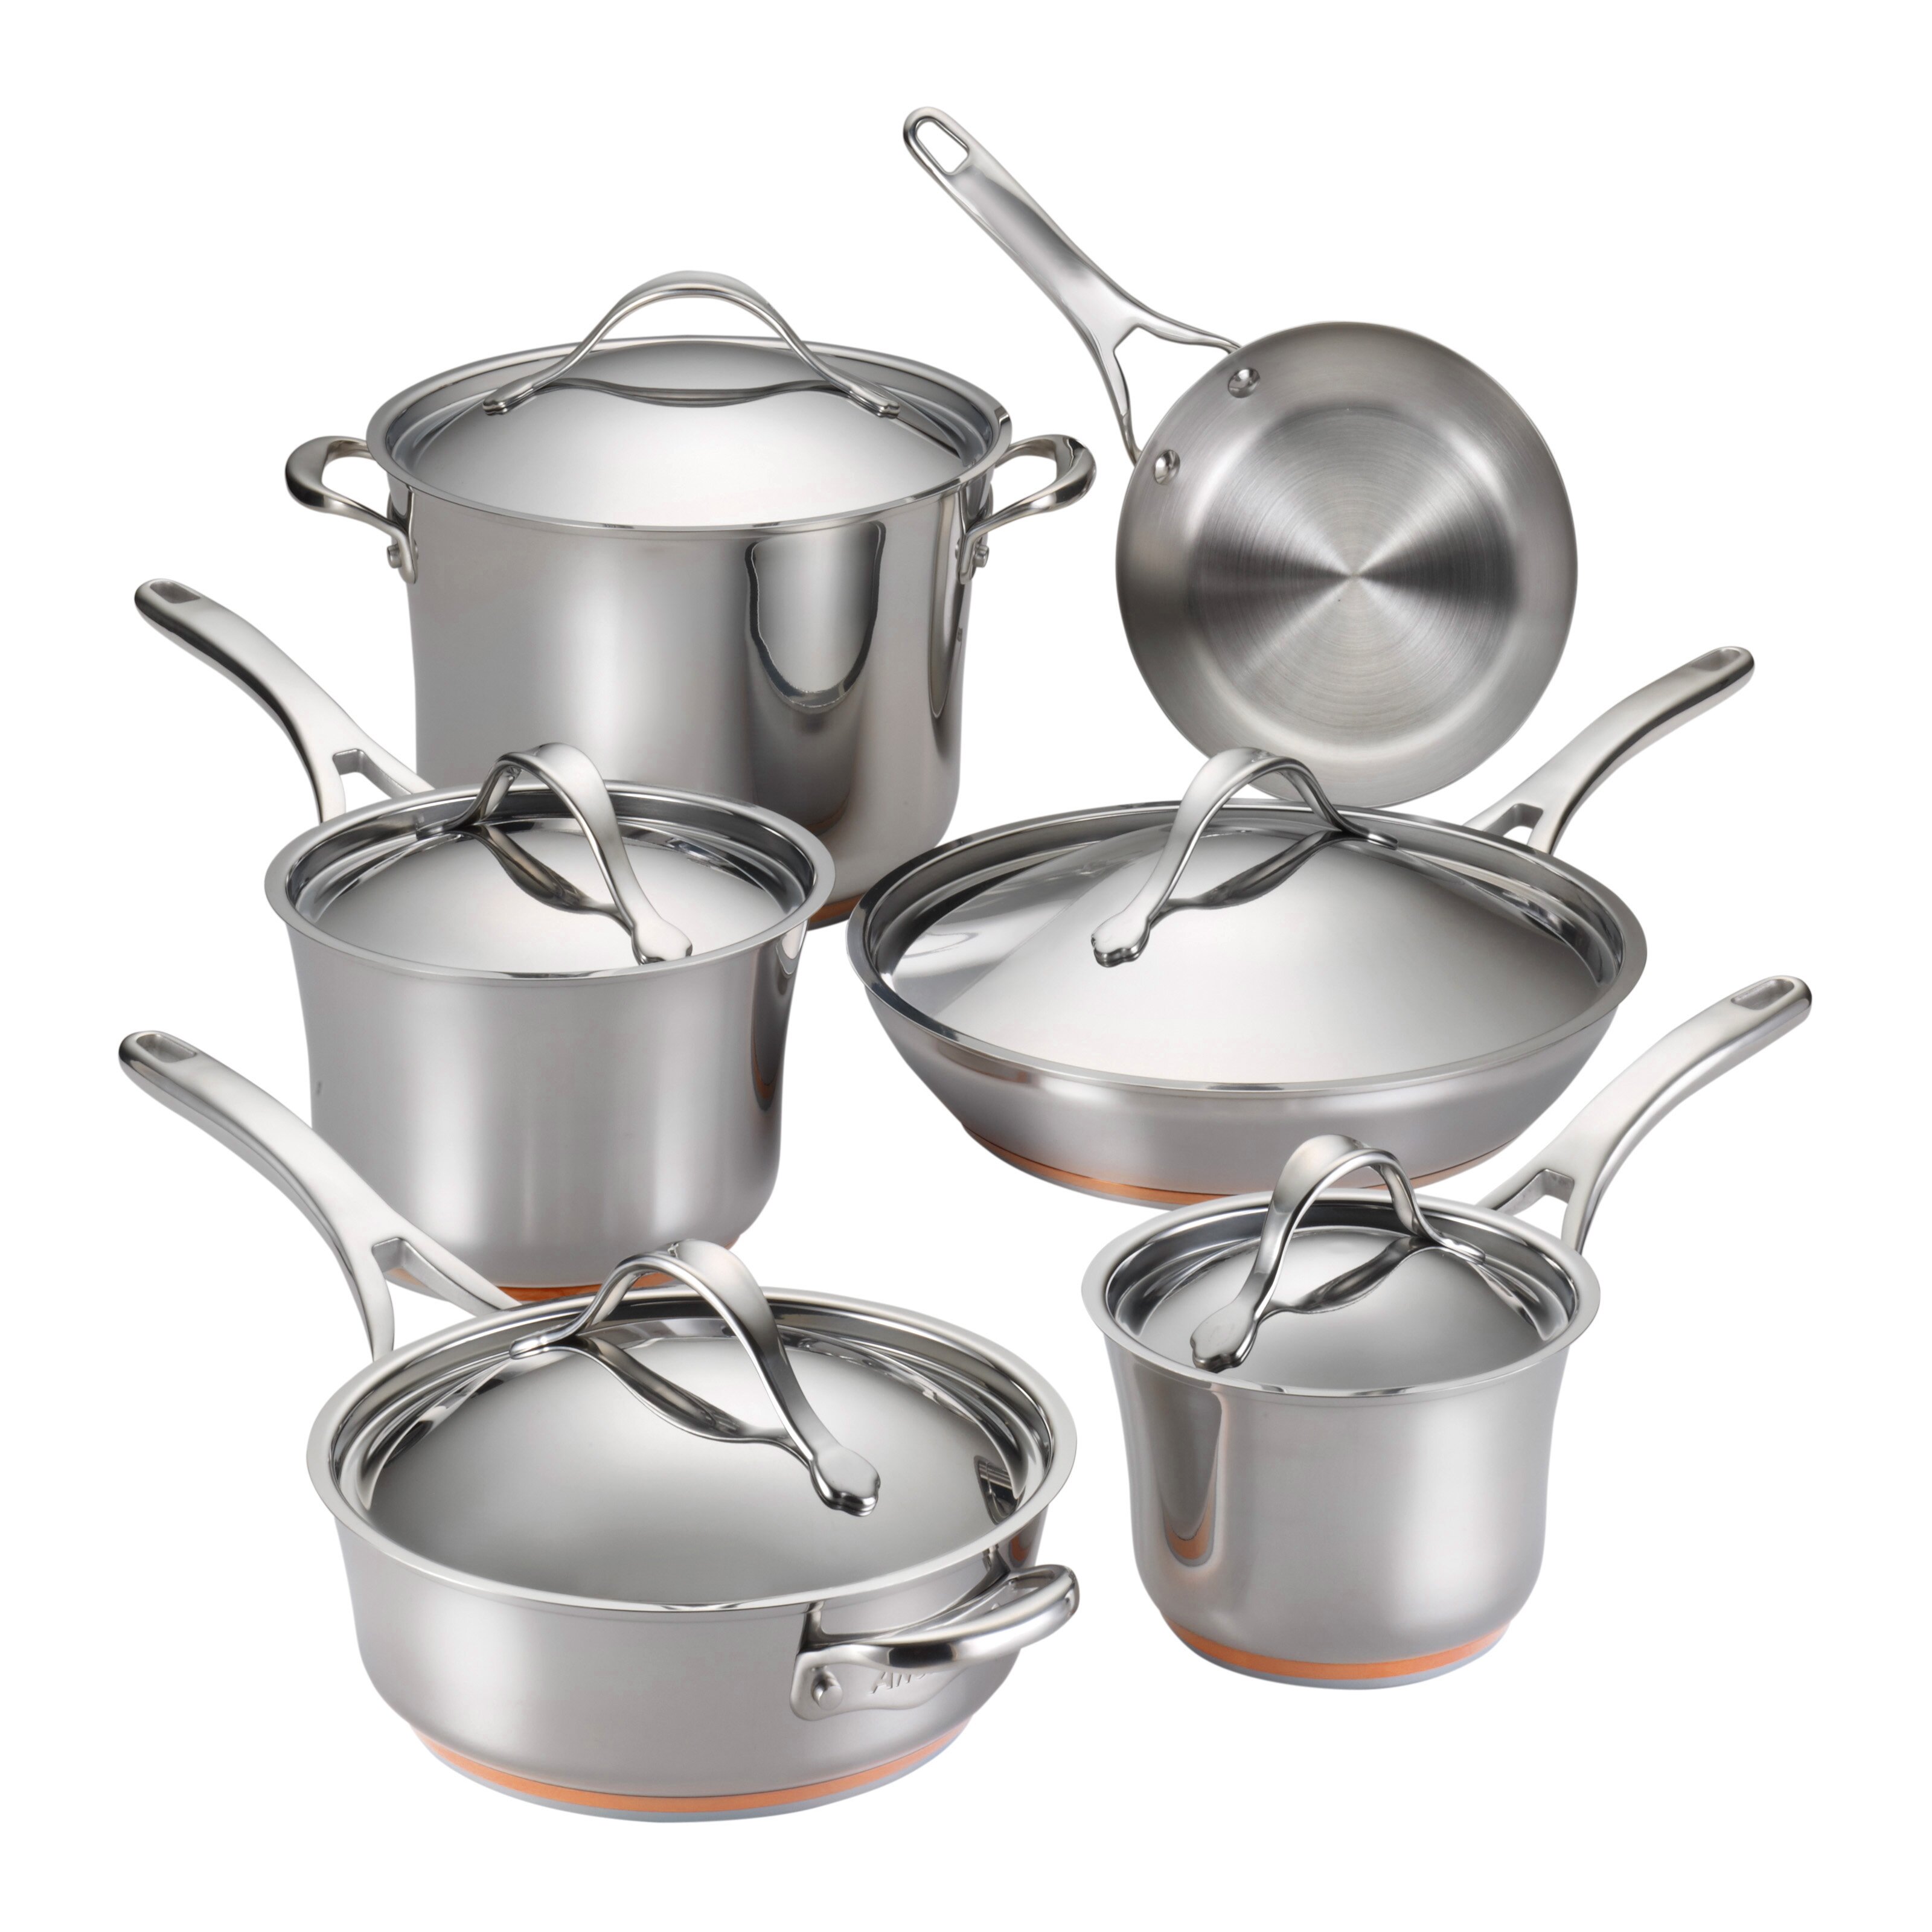 Anolon Nouvelle Copper Stainless Steel Cookware Set